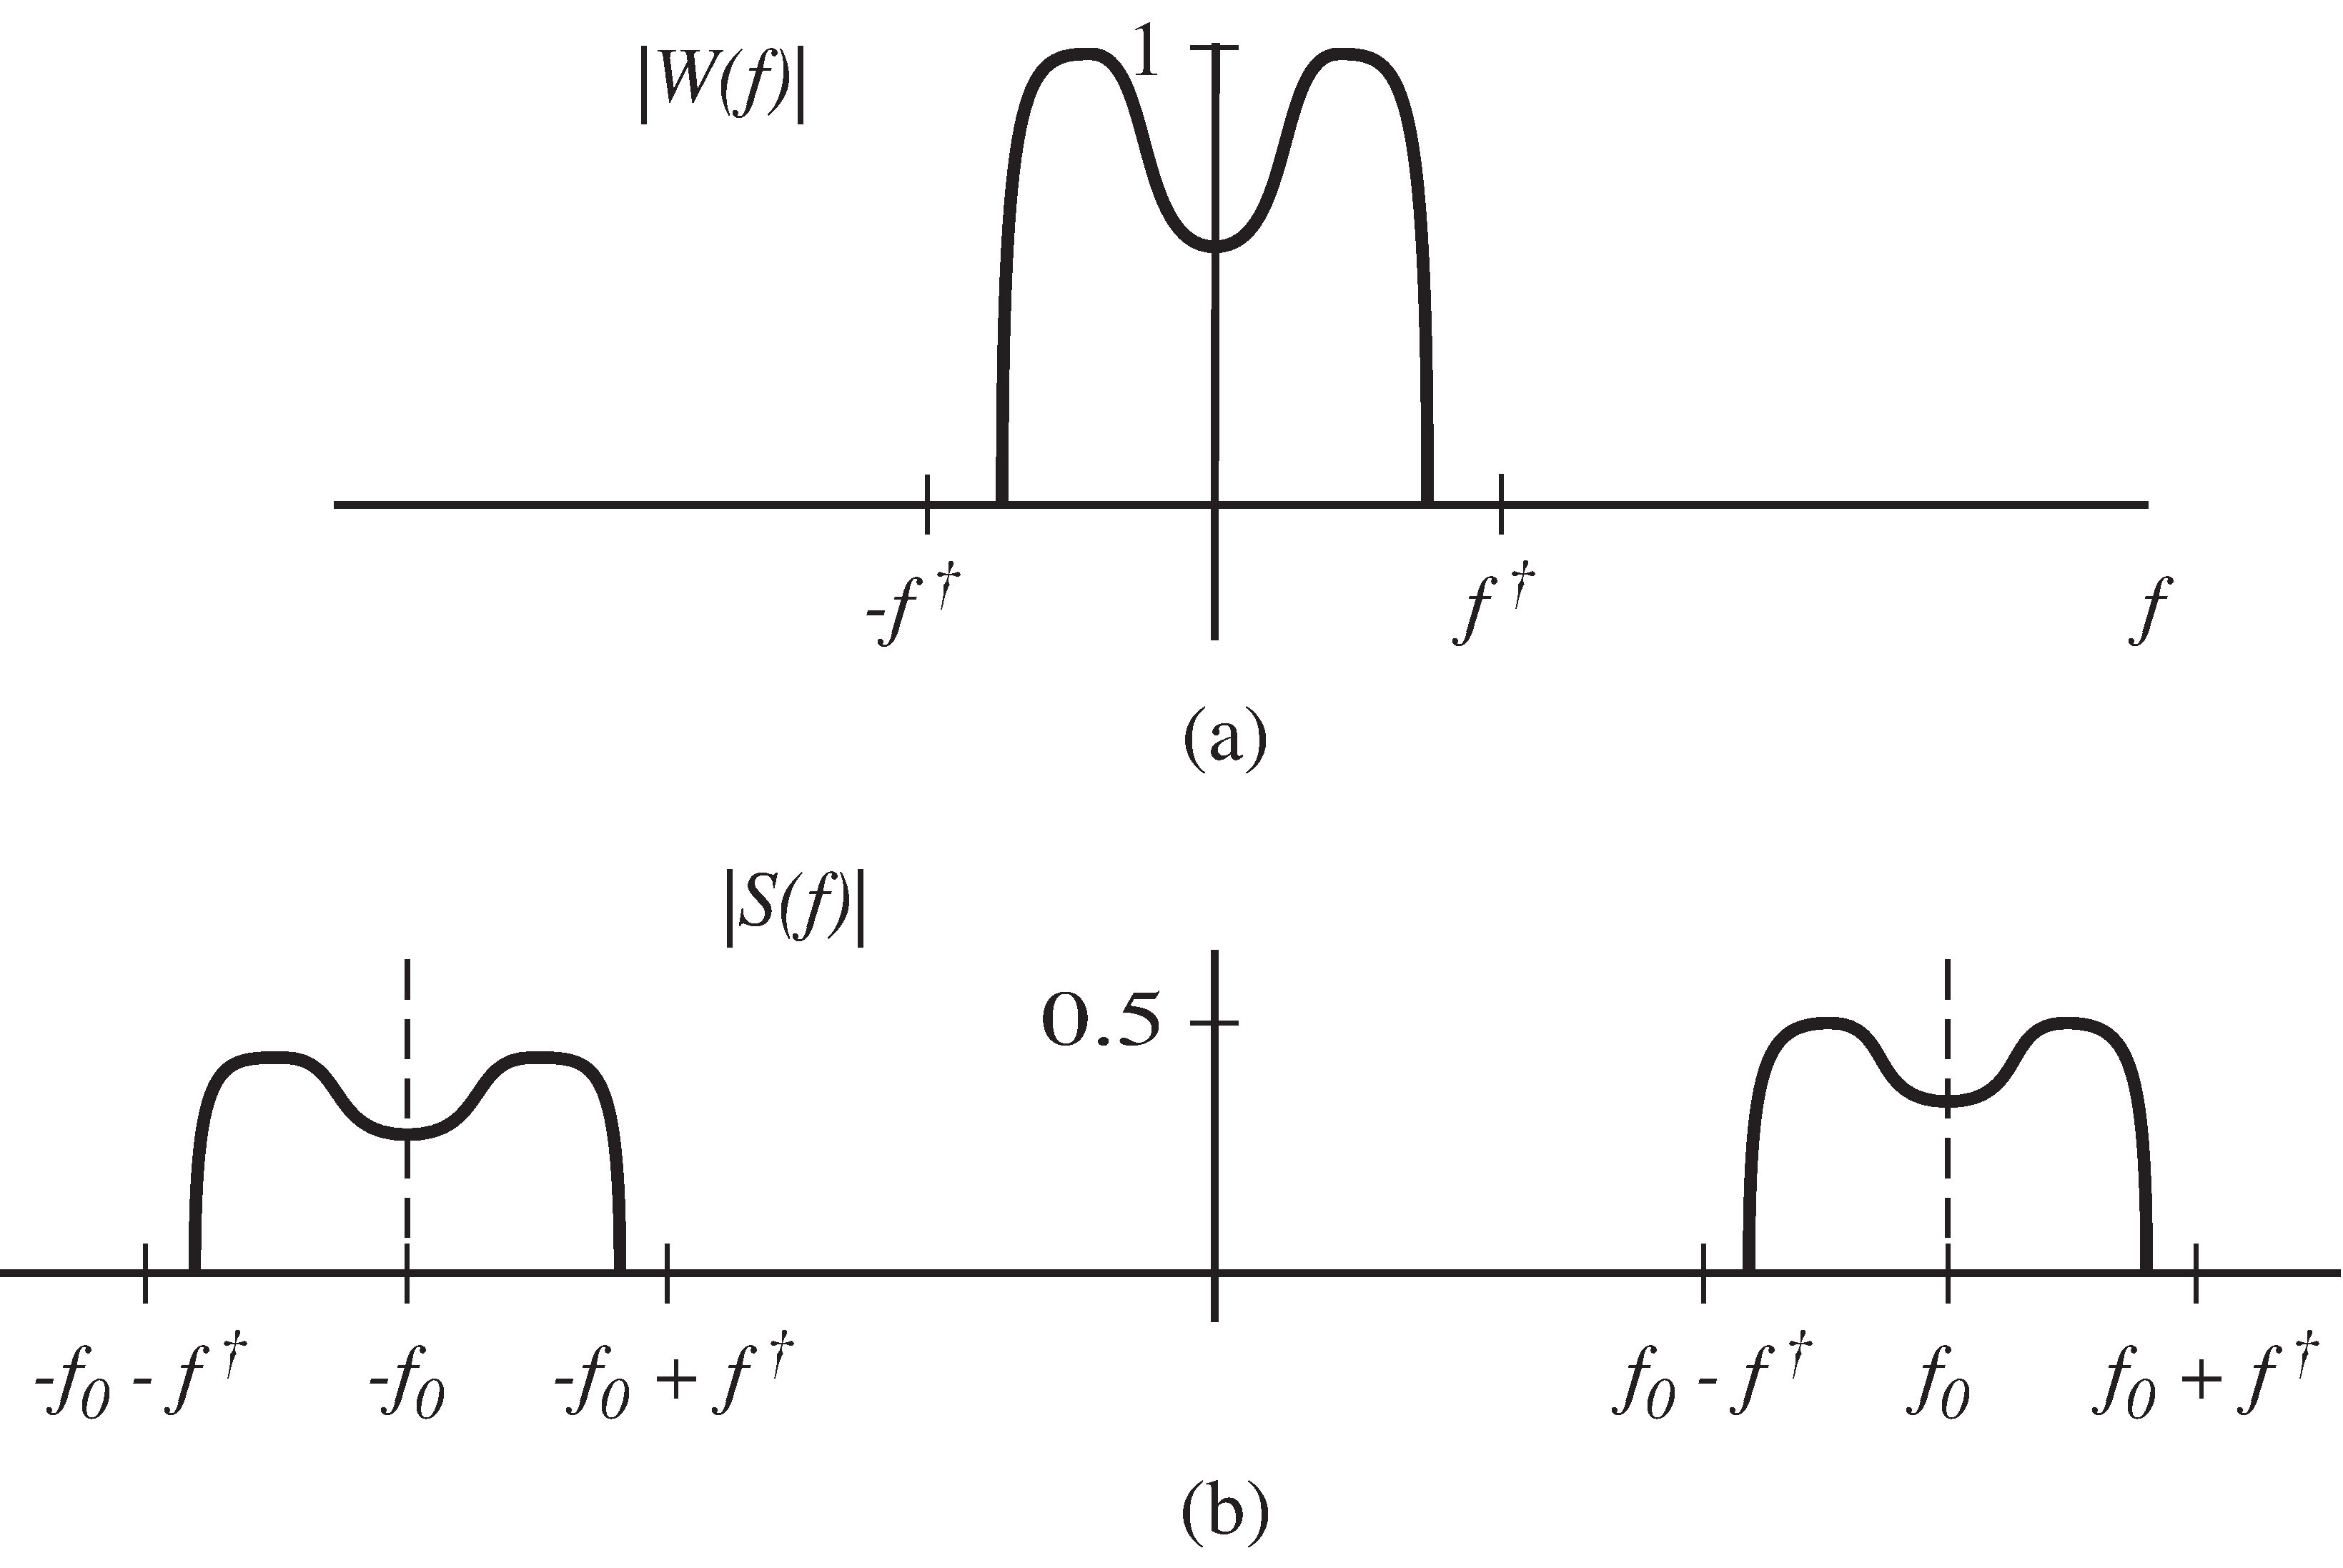 Action of a modulator: If the message signal w(t) has the magnitude spectrum shown in part (a), then the modulated signal s(t) has the magnitude spectrum shown in part (b).